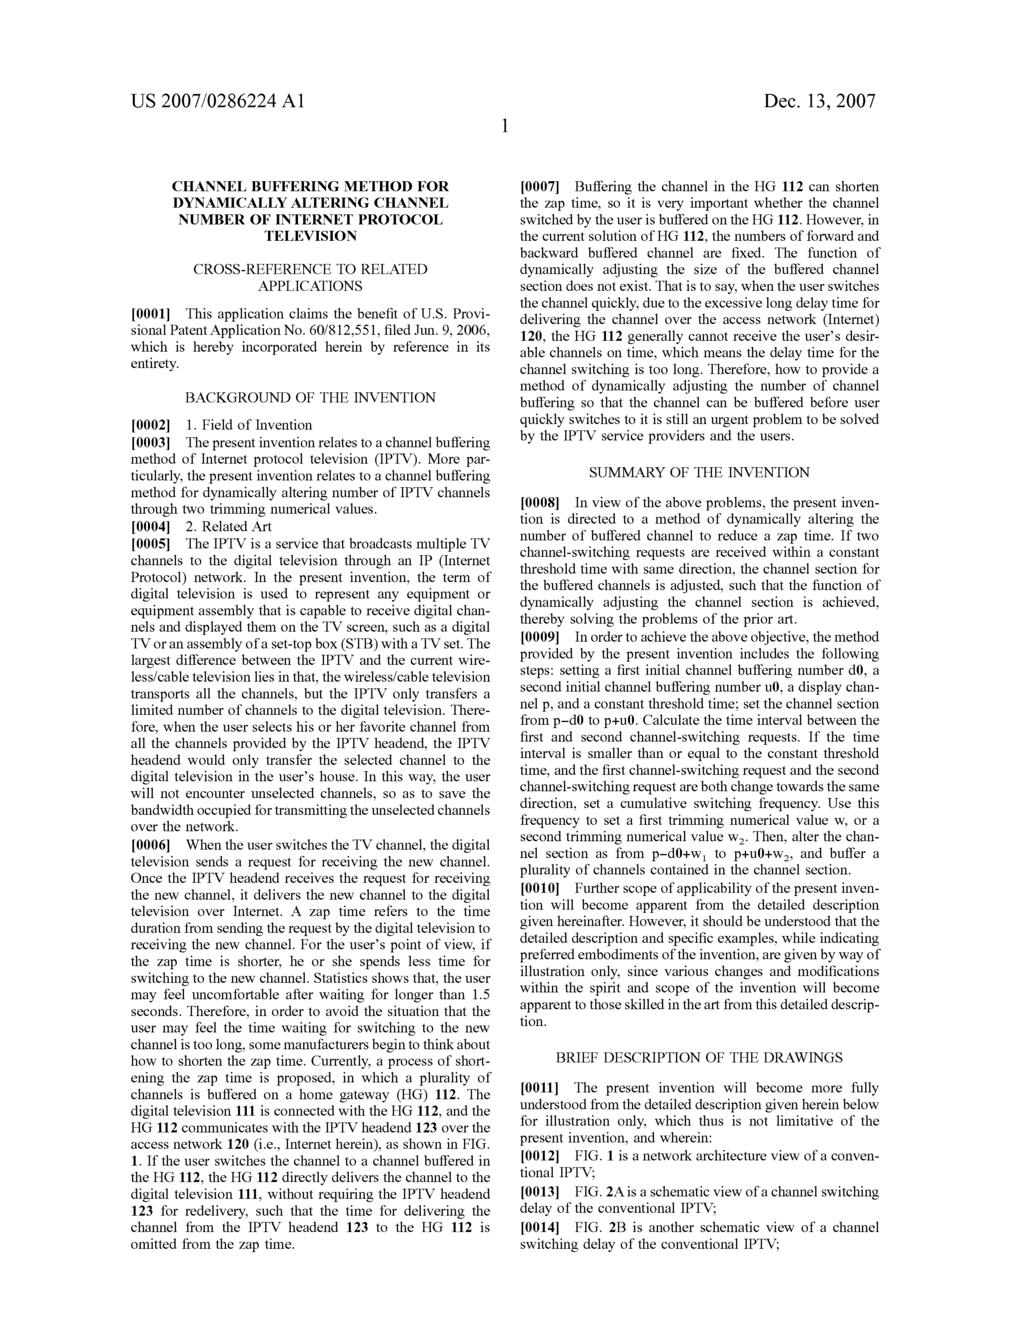 US 2007/0286224 A1 Dec. 13, 2007 CHANNEL BUFFERING METHOD FOR DYNAMICALLY ALTERING CHANNEL NUMBER OF INTERNET PROTOCOL TELEVISION CROSS-REFERENCE TO RELATED APPLICATIONS 0001.